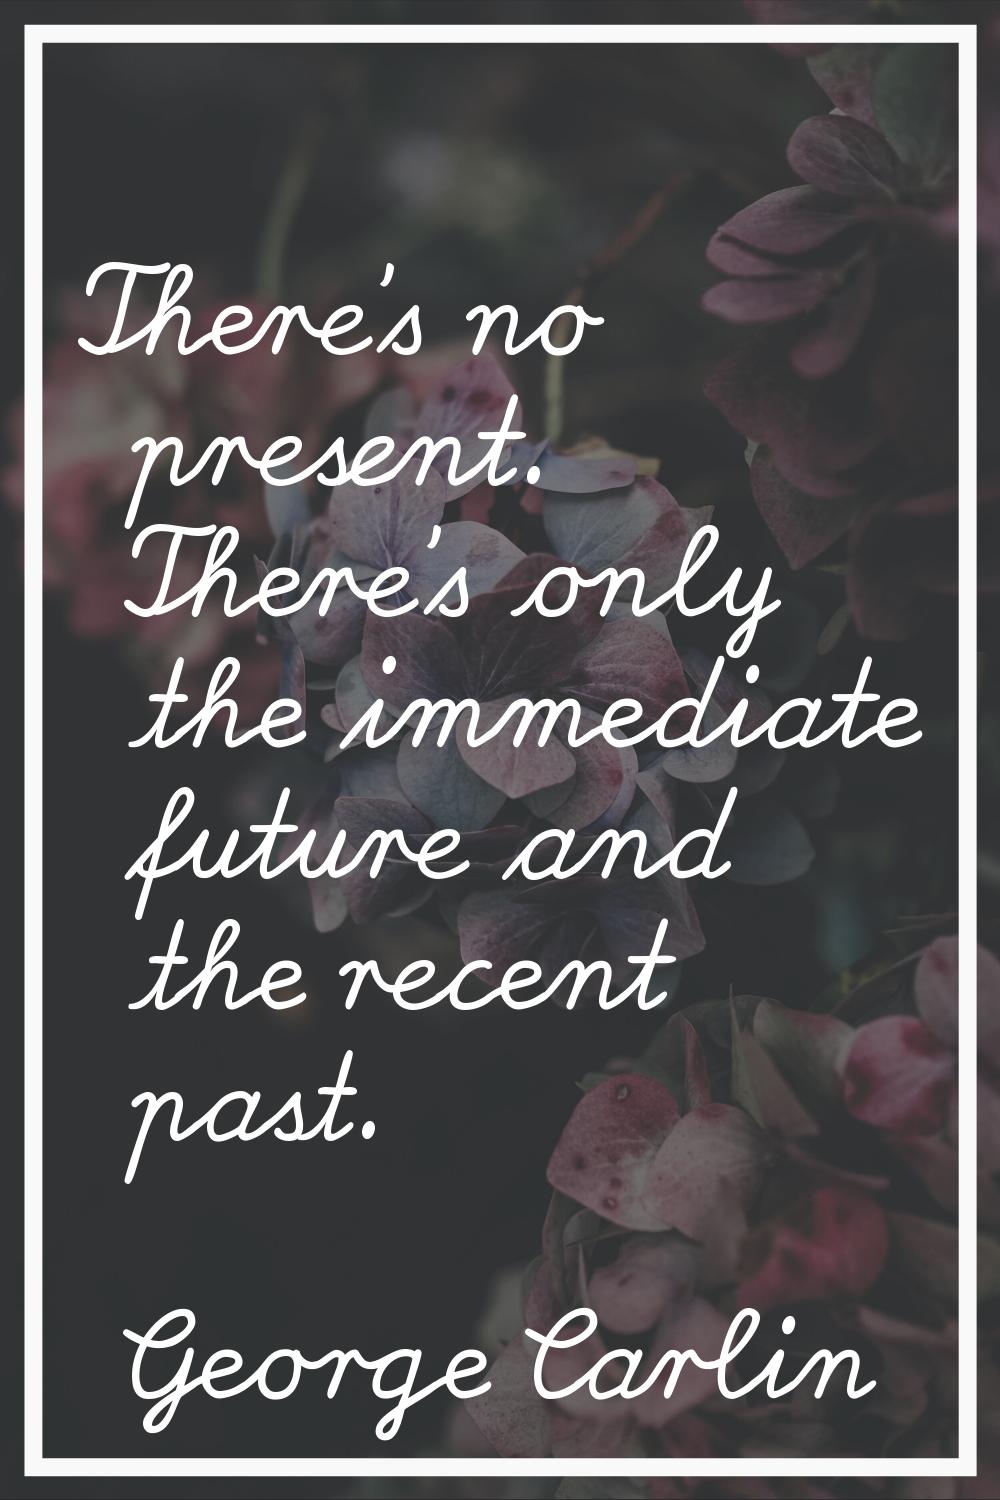 There's no present. There's only the immediate future and the recent past.